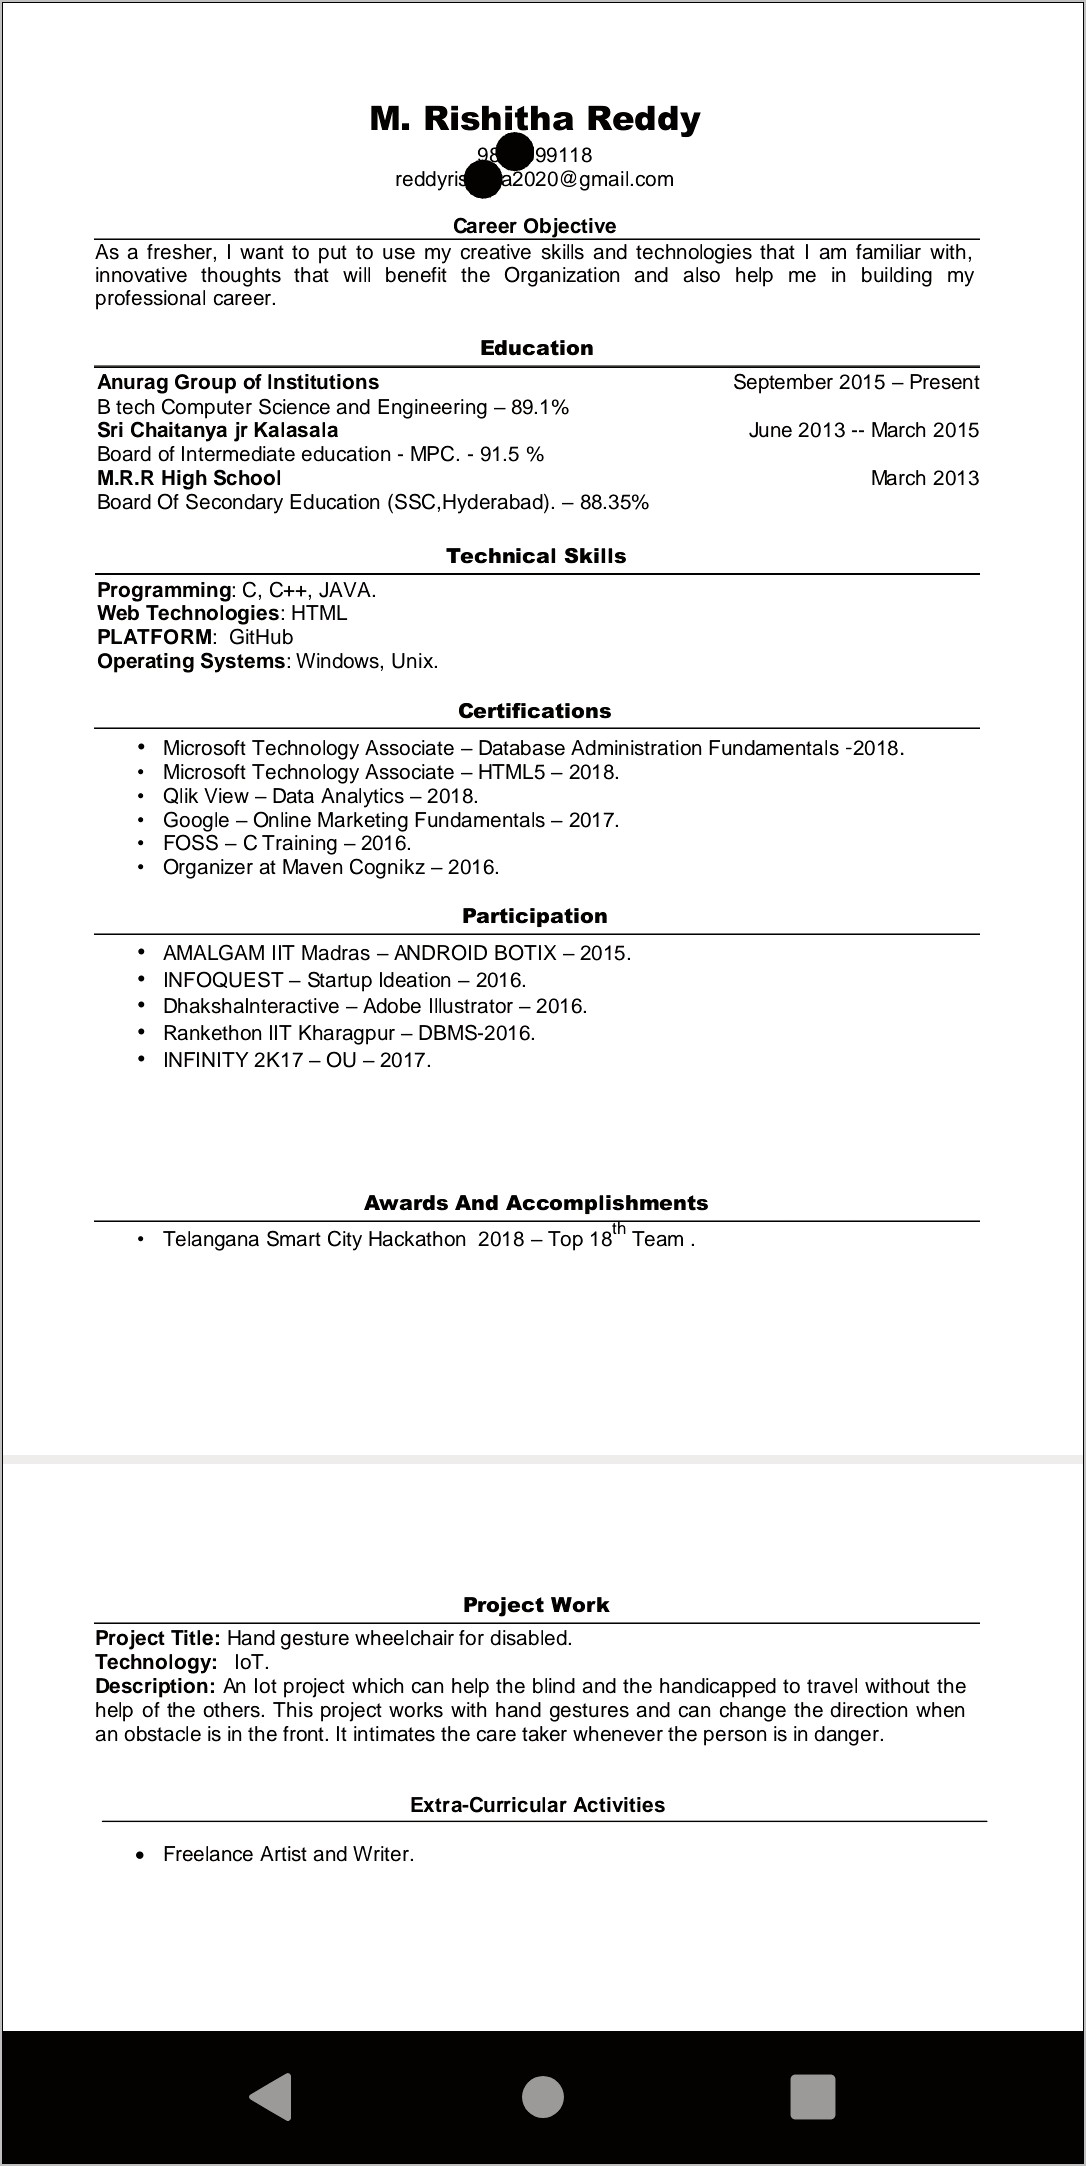 Do You Add Hands On Experiences In Resume